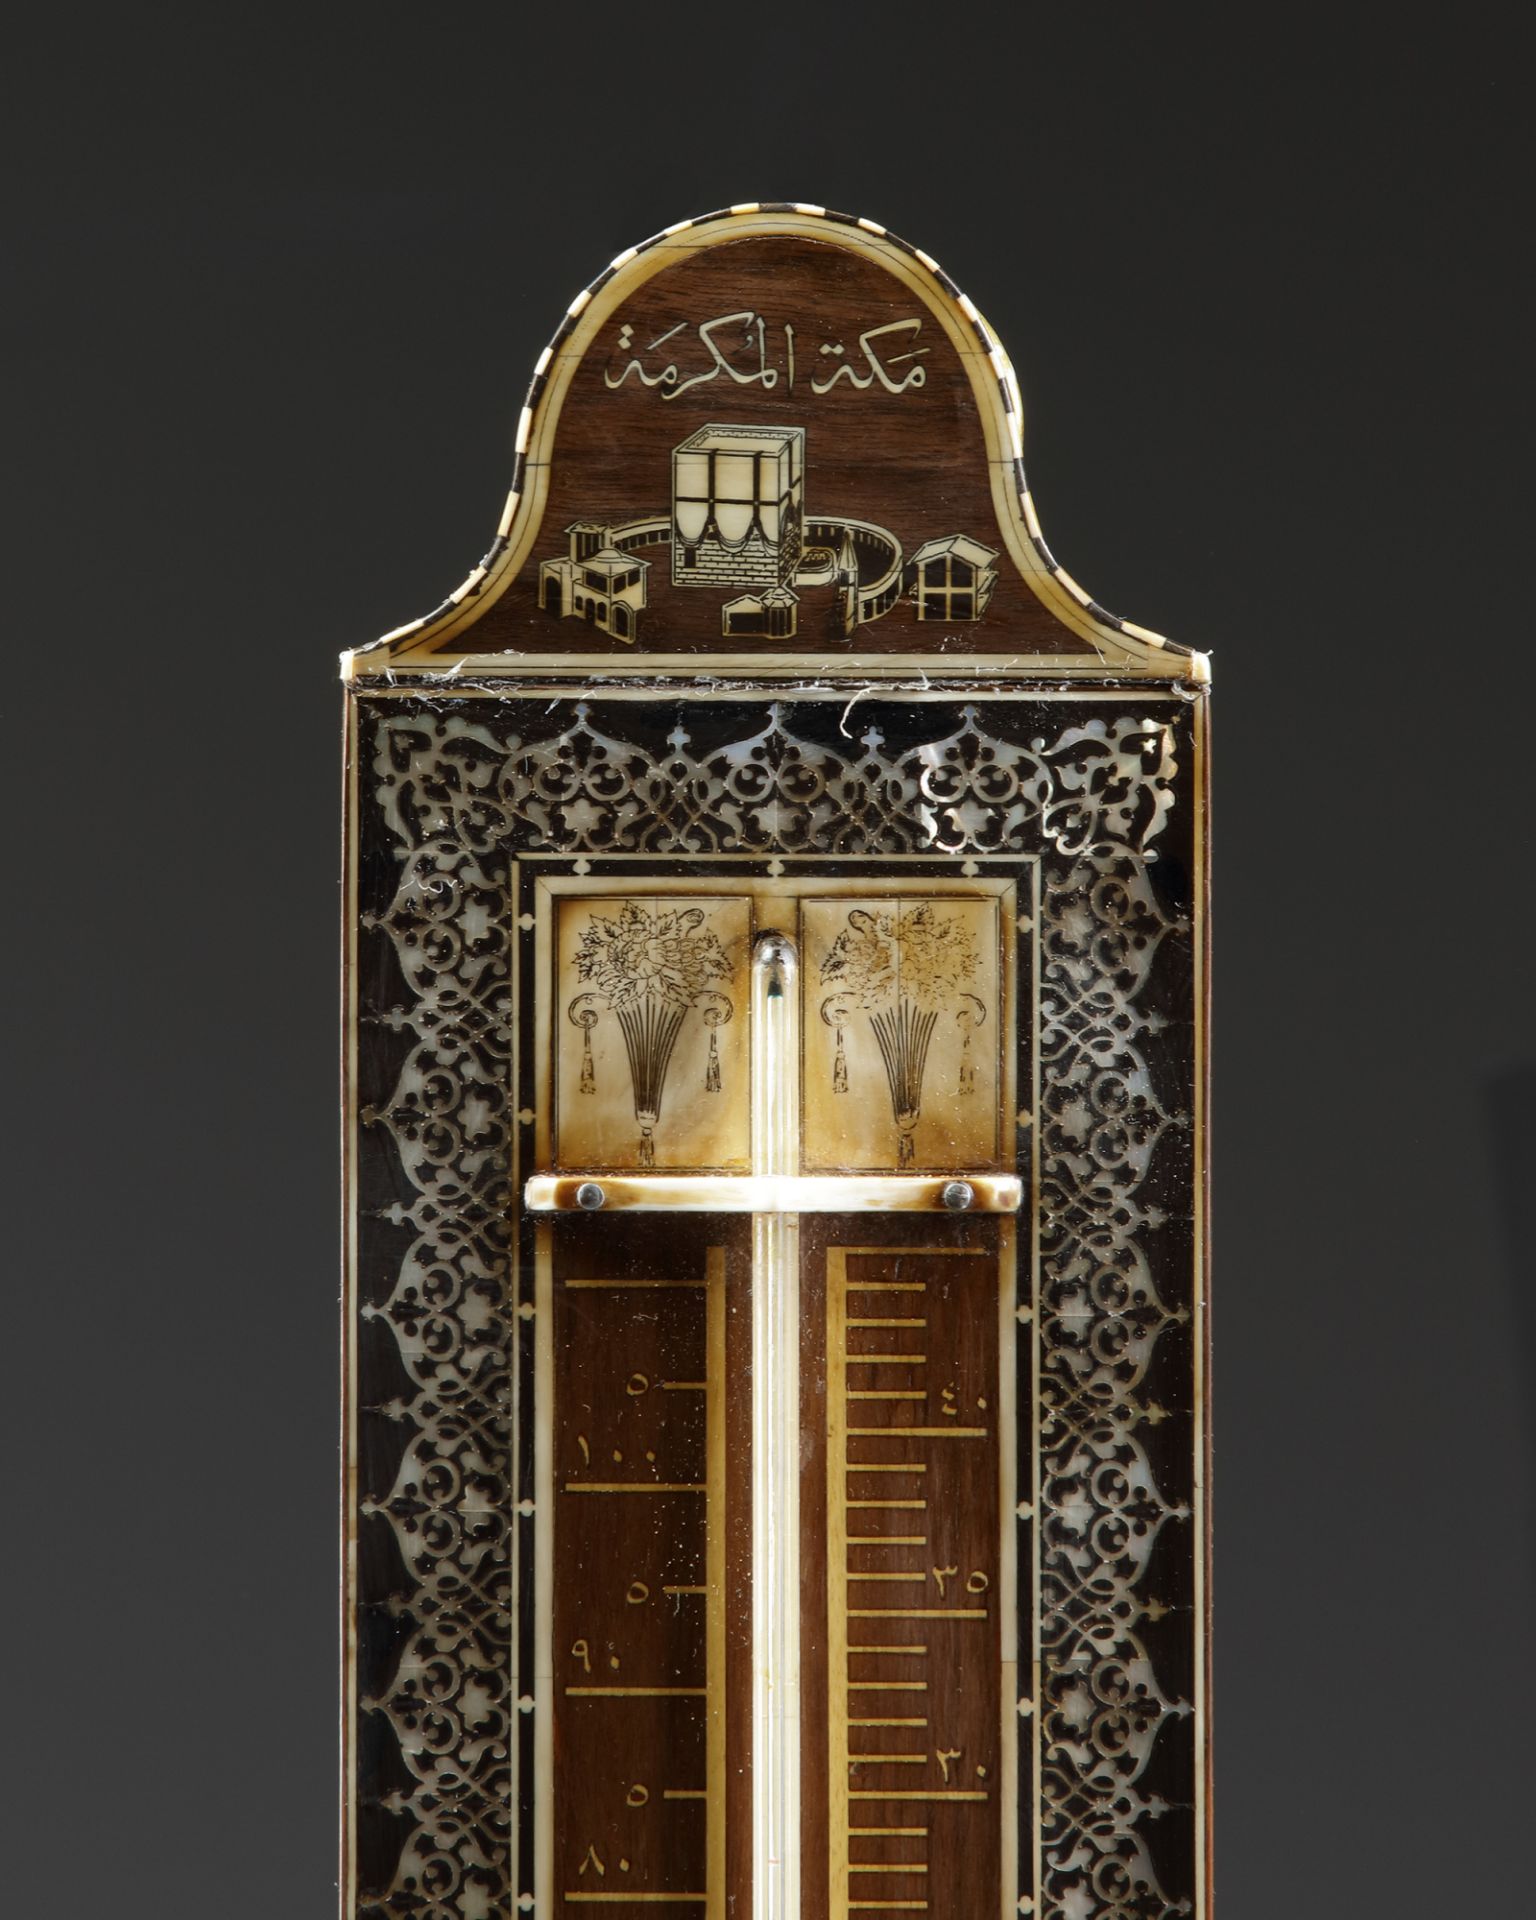 AN OTTOMAN WOODEN MOTHER-OF-PEARL AND IVORY INLAID BAROMETER,1297 AH/1879 - 1880 AD - Image 12 of 12